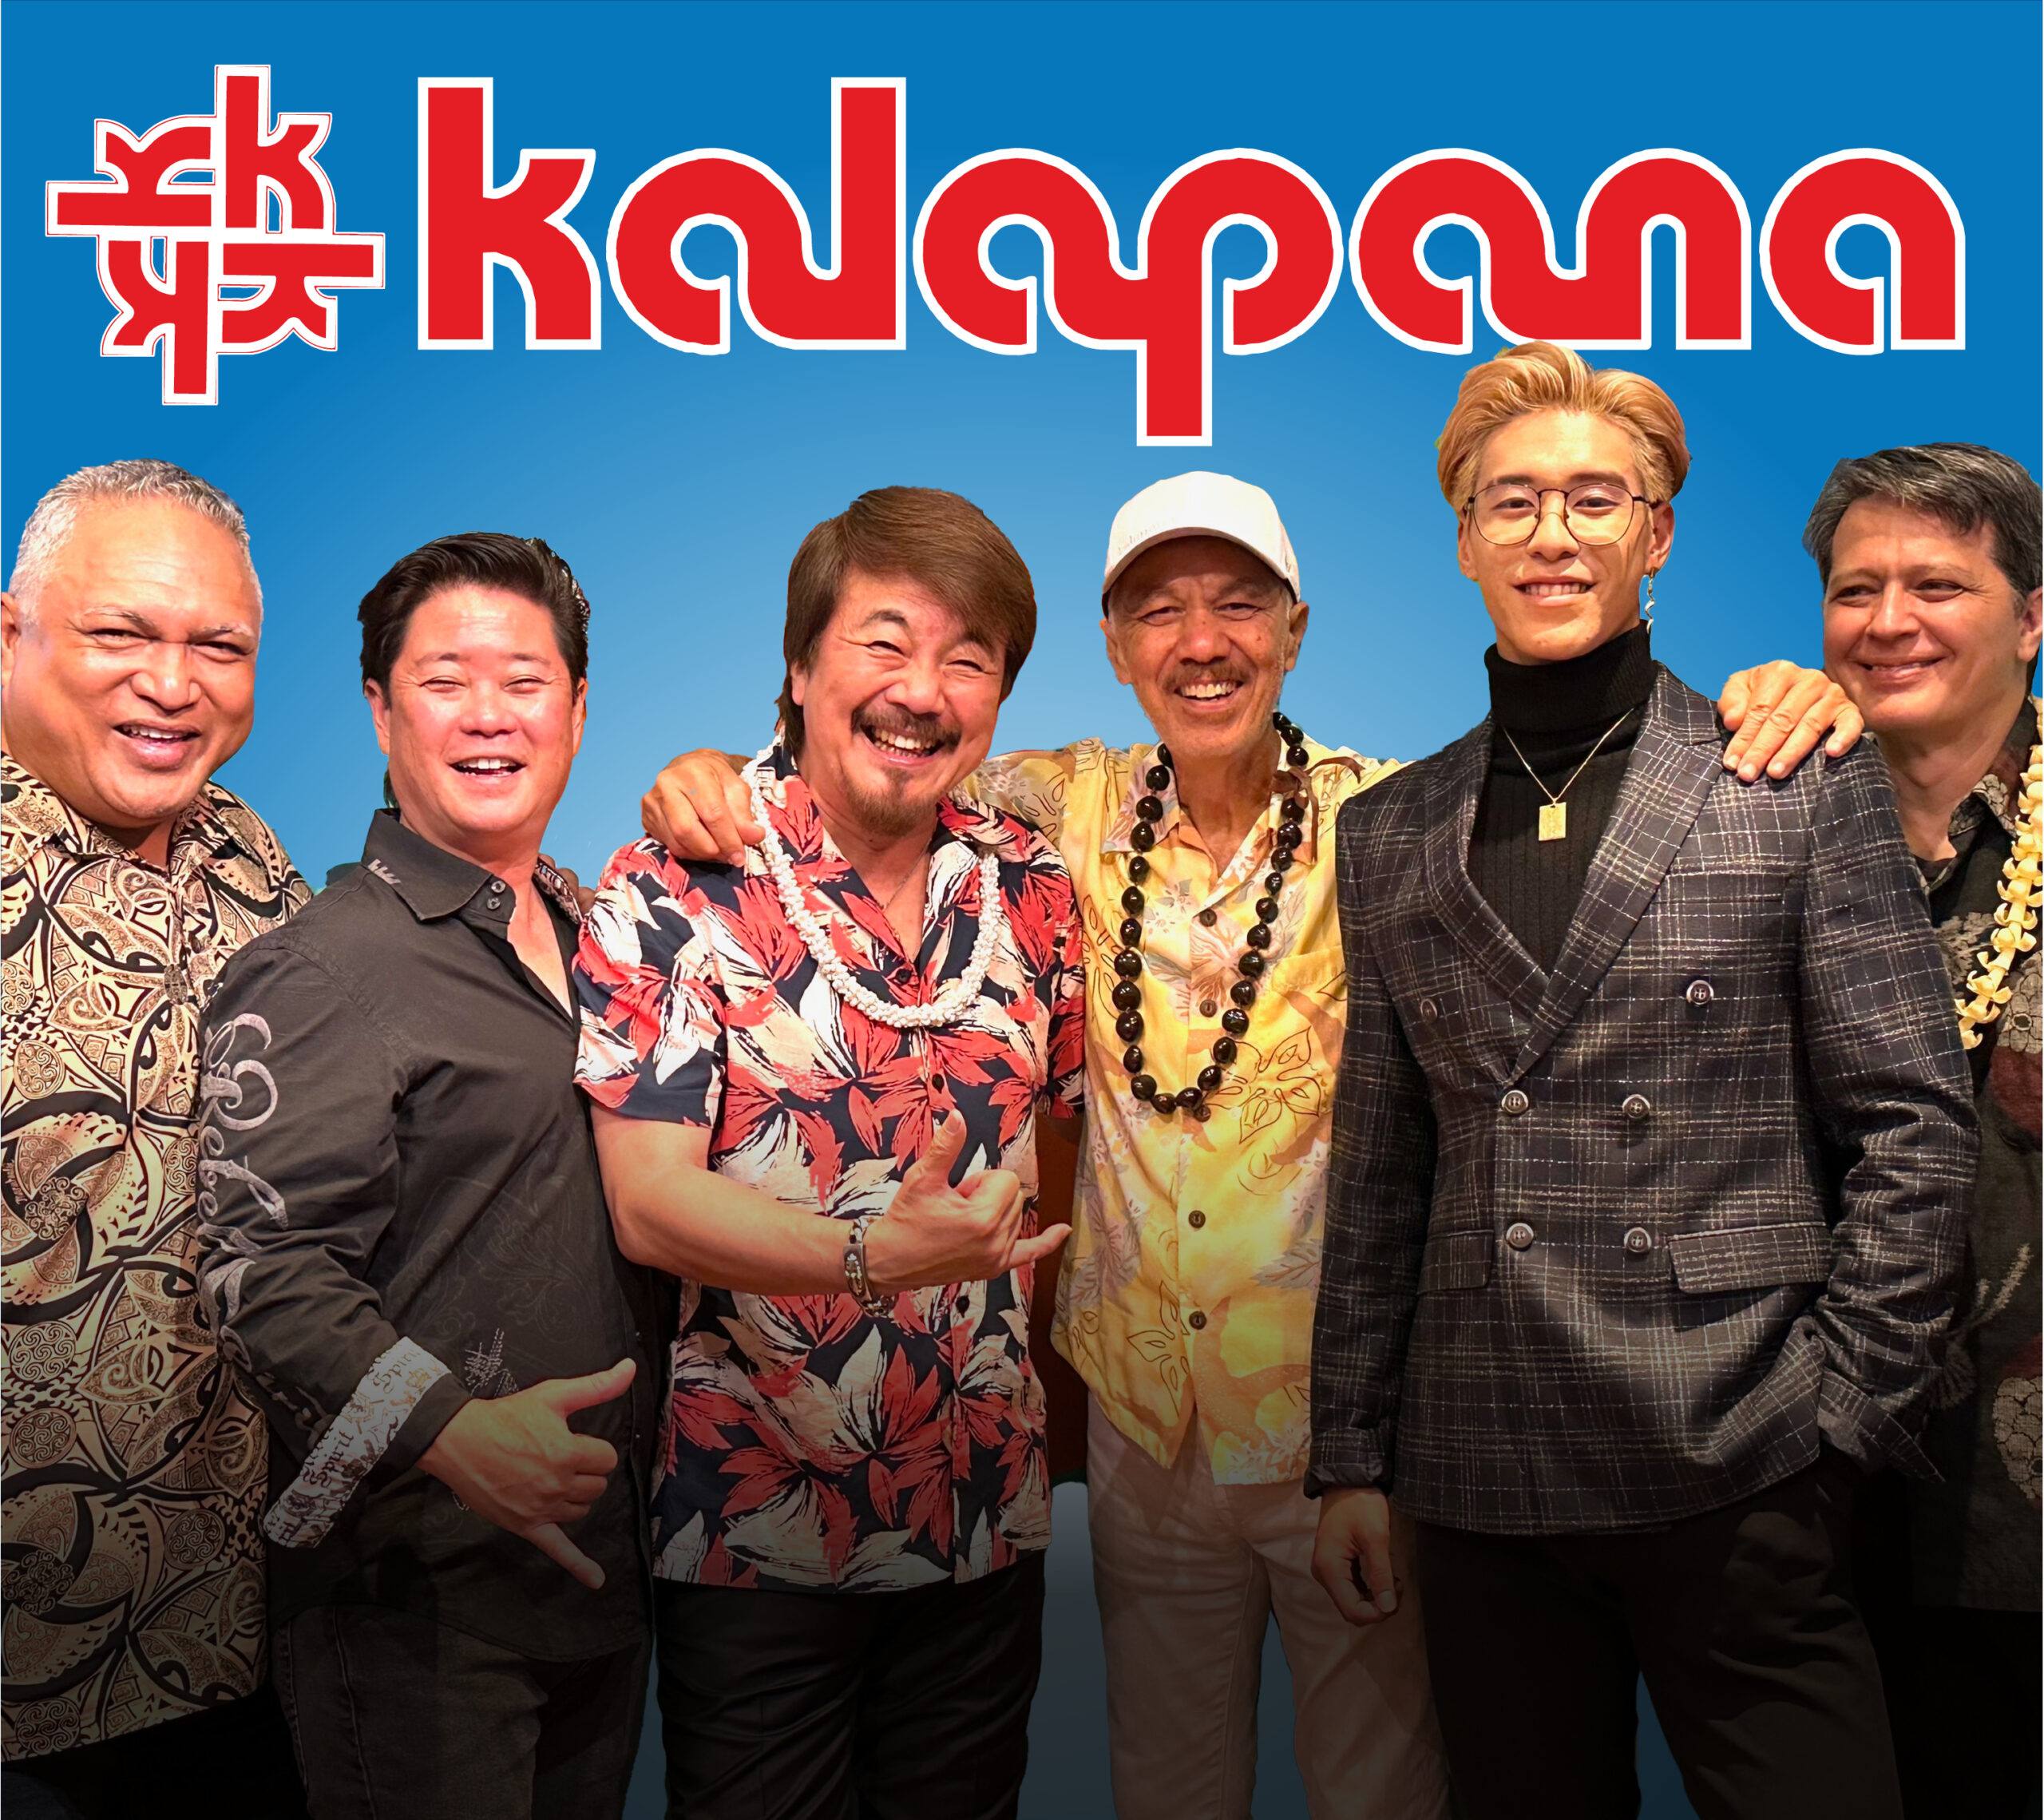 A group of men standing next to each other with the words kalapana.